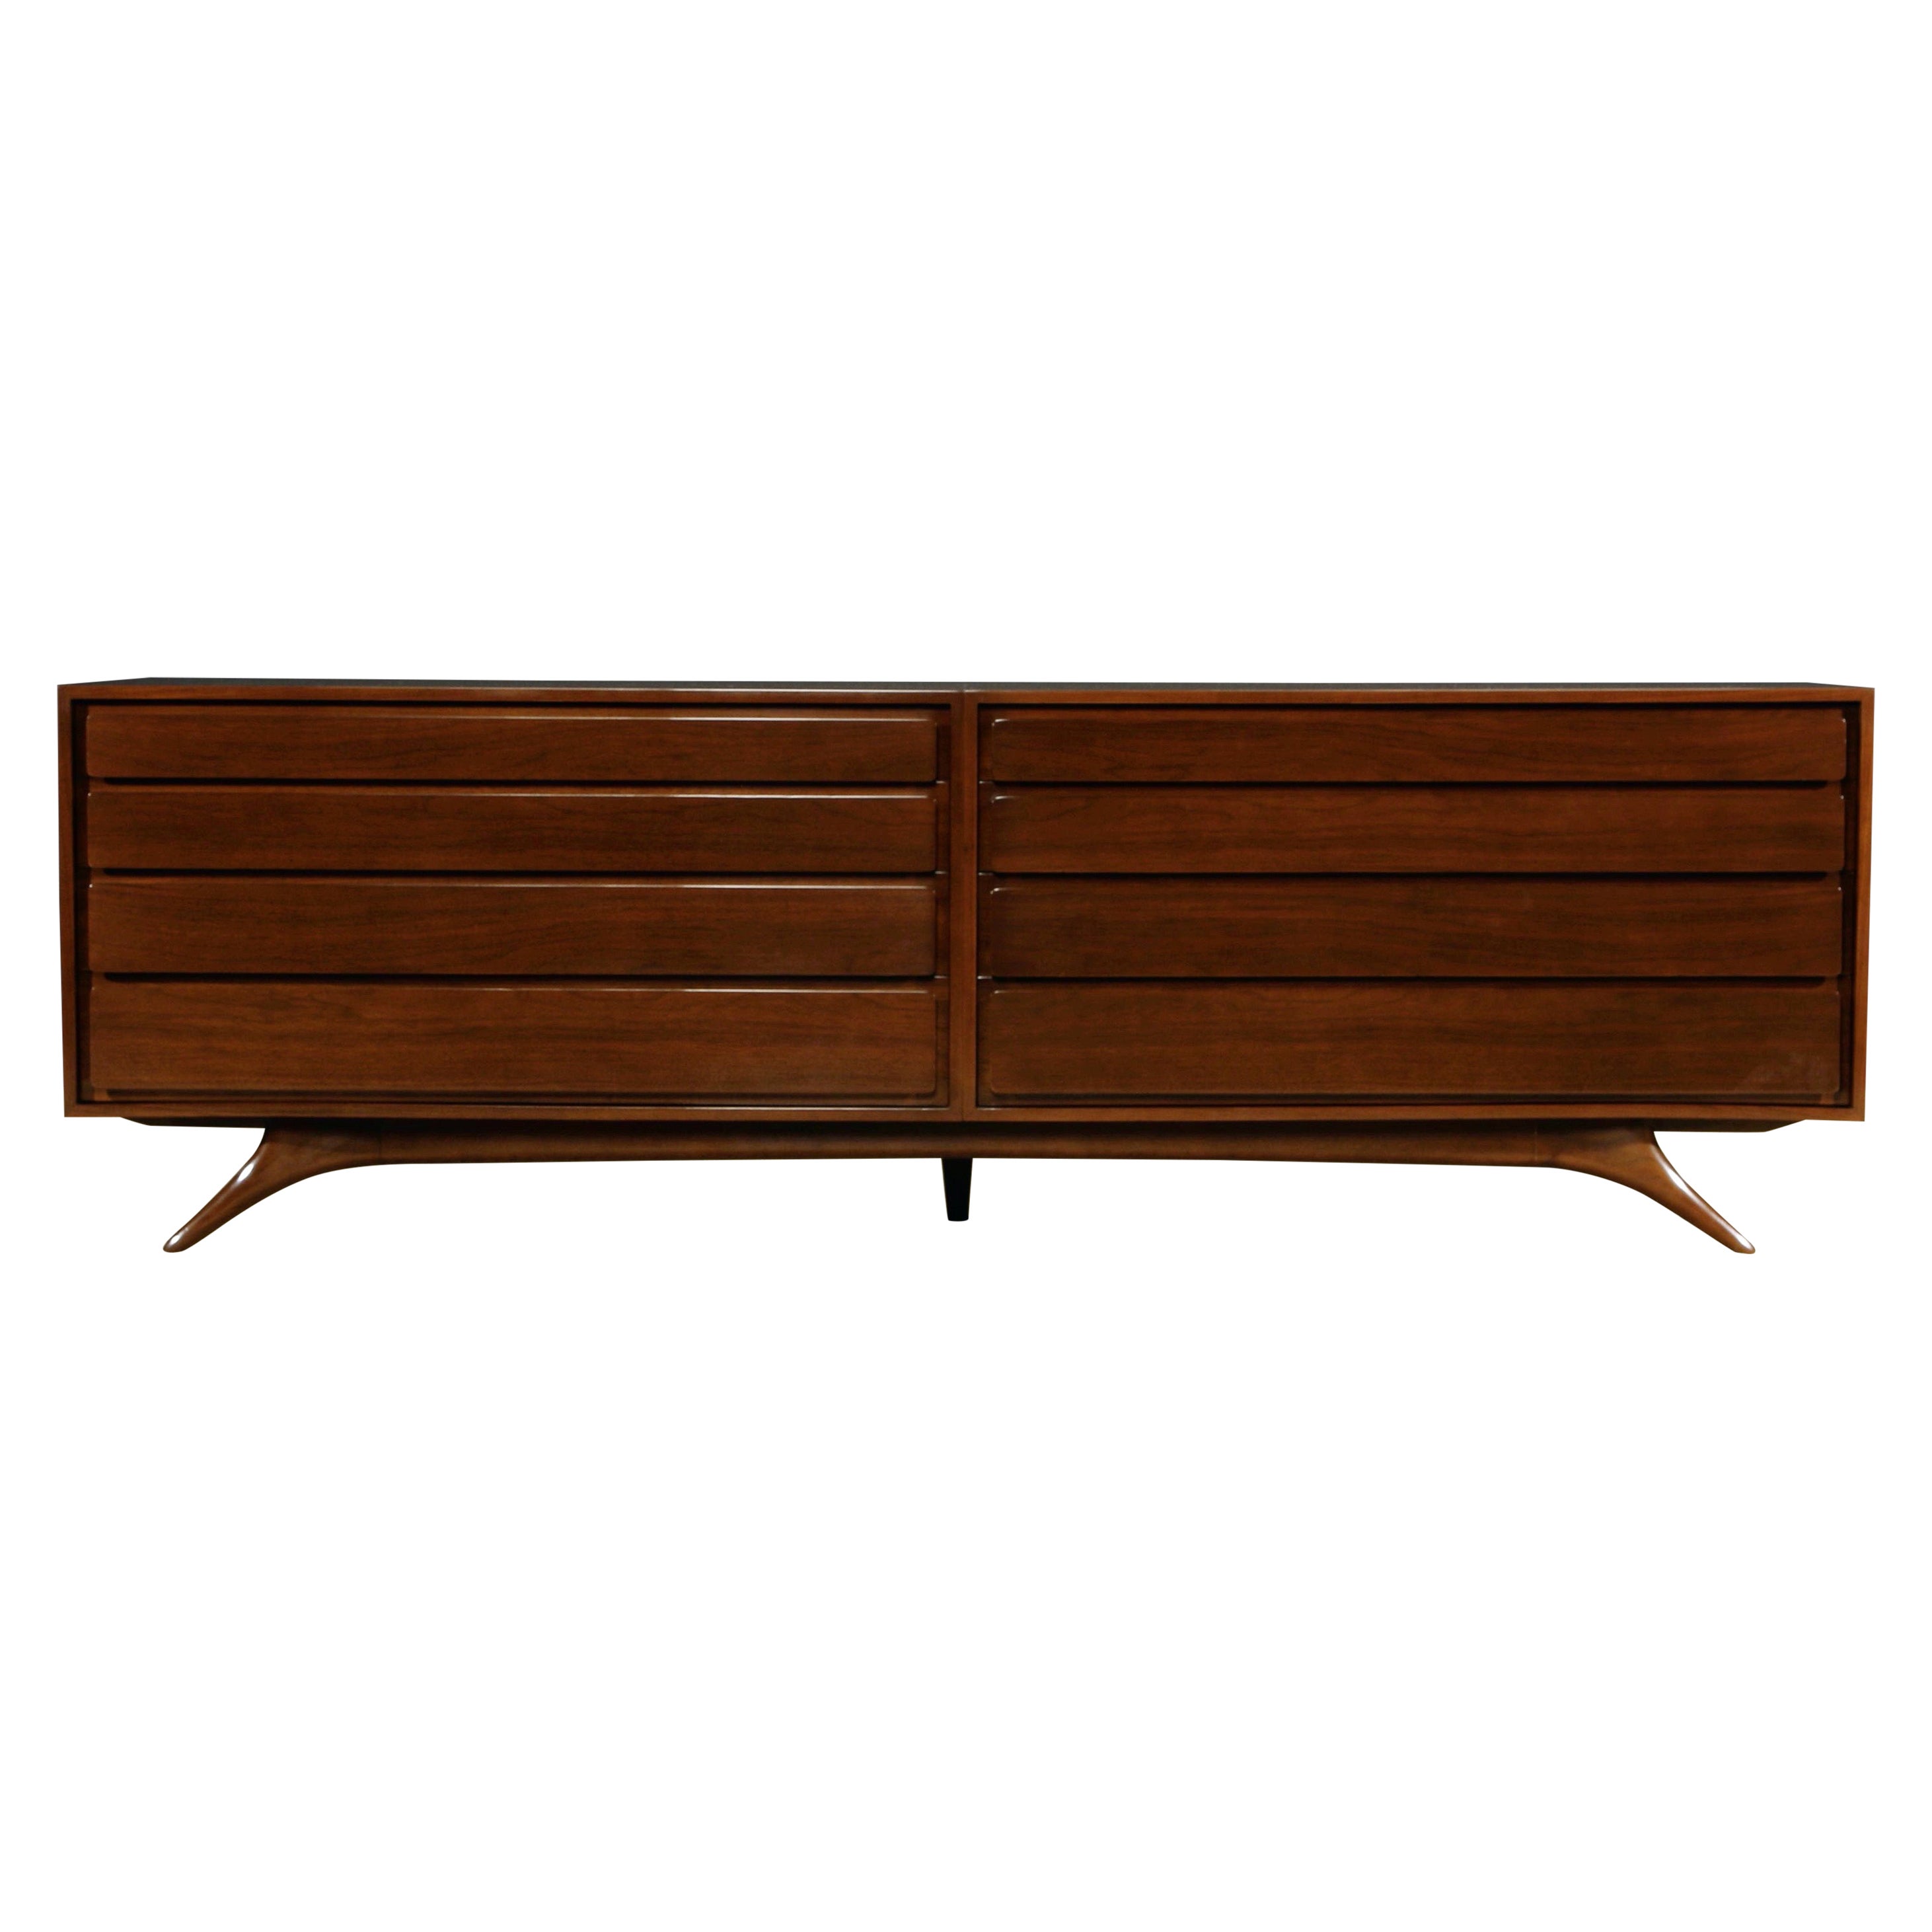 Important Double Dresser by Vladimir Kagan for Kagan-Dreyfuss, 1950s, Signed